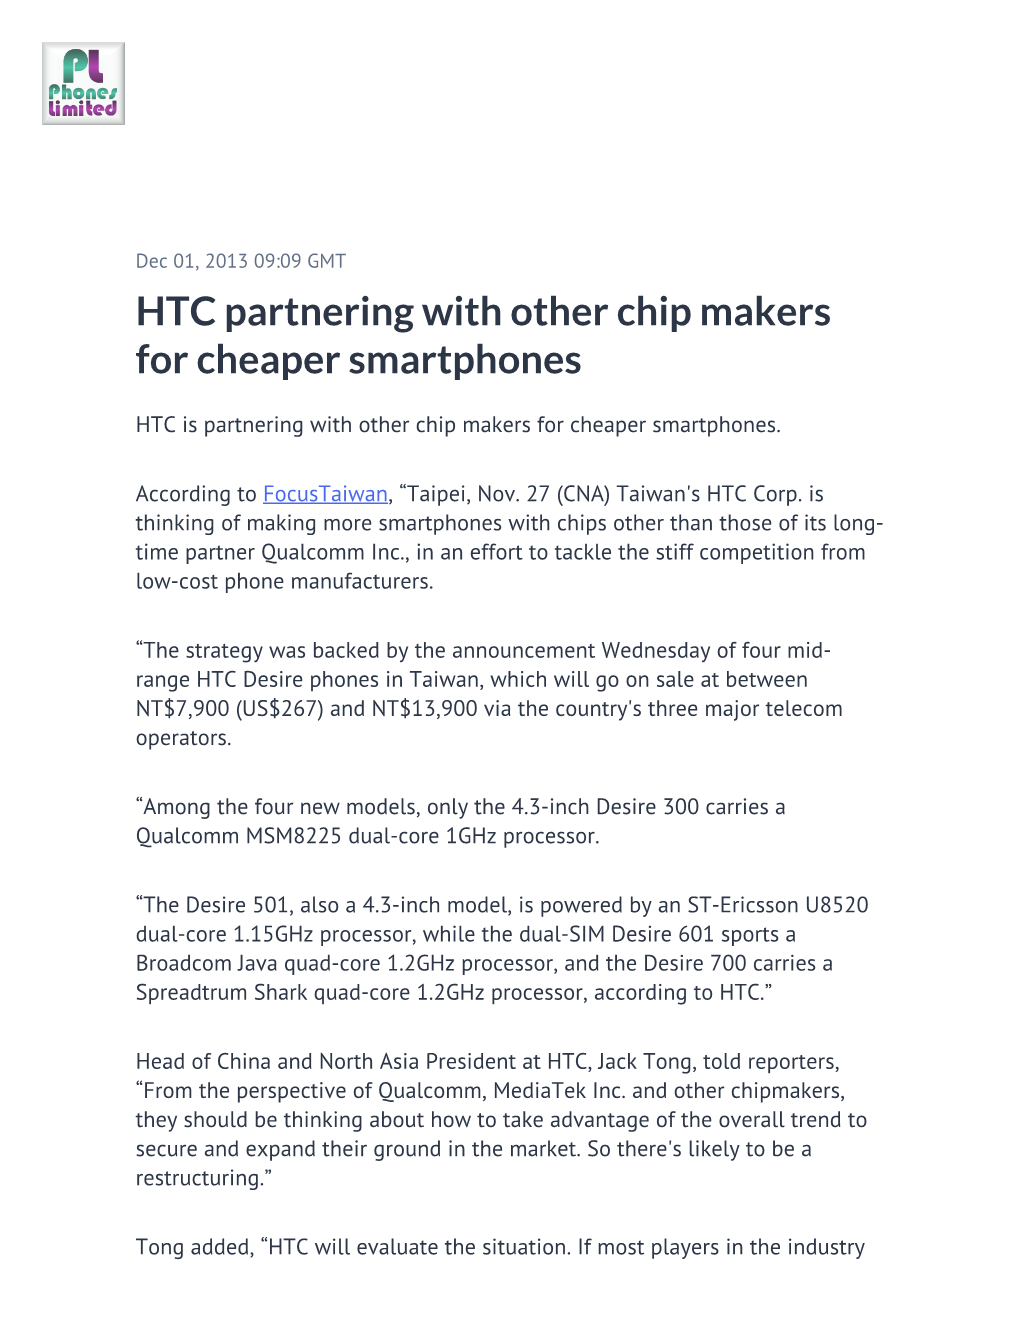 HTC Partnering with Other Chip Makers for Cheaper Smartphones